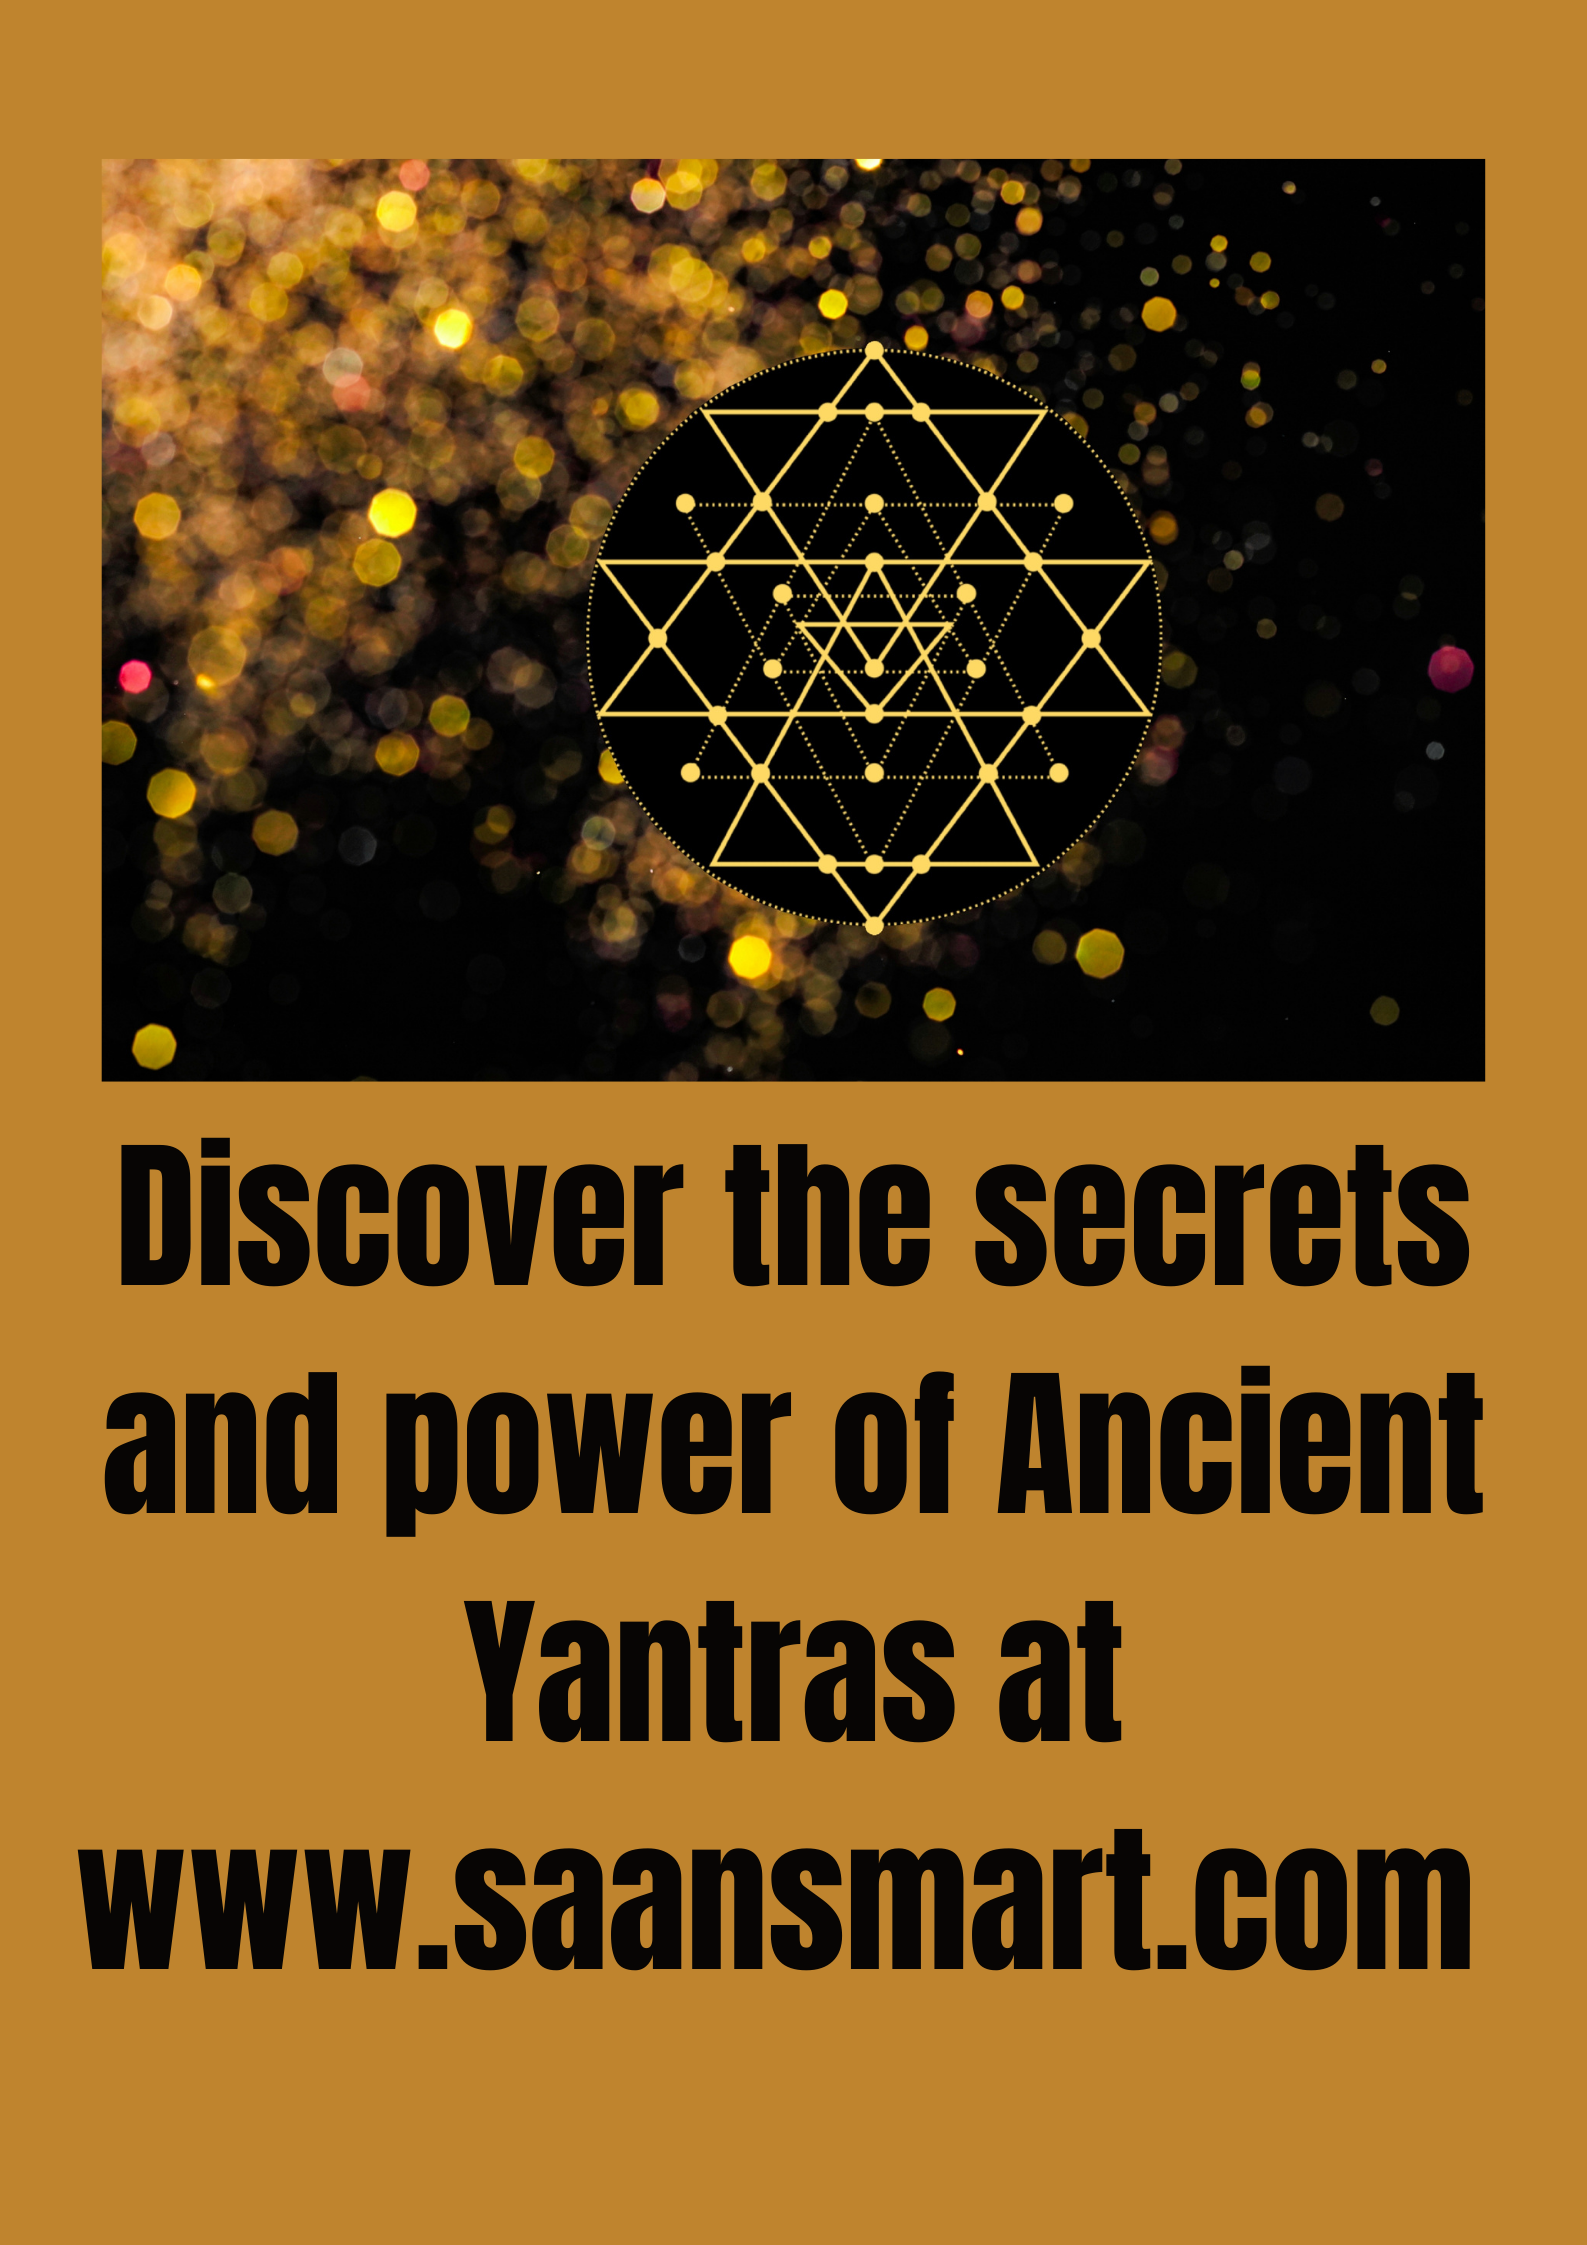 the ancient science of yantras